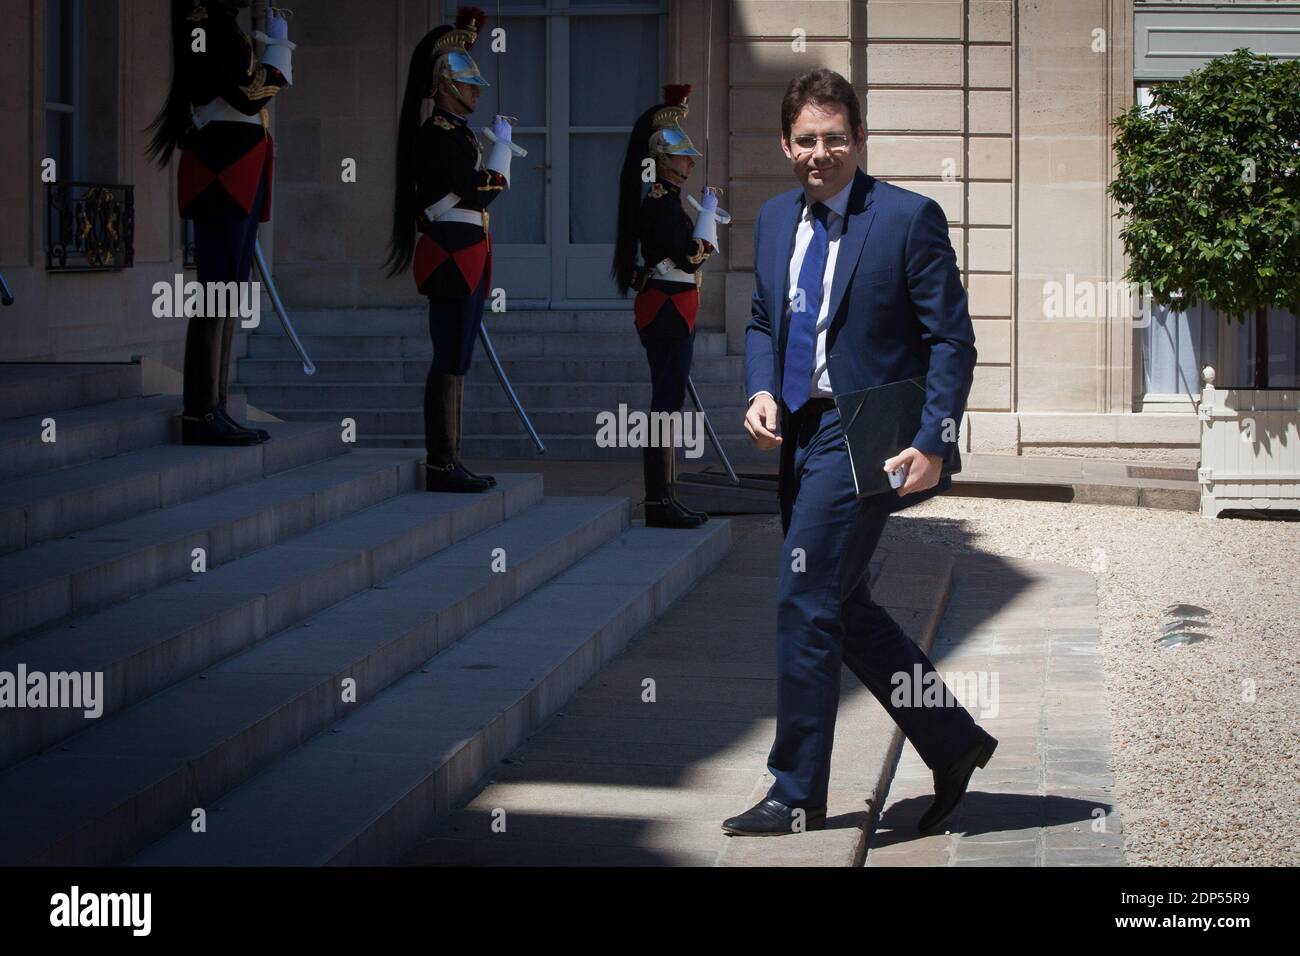 French Secretary of State for Foreign Trade, Tourism Promotion and French Citizens Living Abroad Matthias Fekl arriving at Elysee Palace for talks with French President Francois Hollande and Chinese Prime Minister Li Keqiang at the Elysee Palace in Paris, France on June 30, 2015. Li Keqiang is on a three-day state visit to France. Photo by Audrey Poree/ABACAPRESS.COM Stock Photo